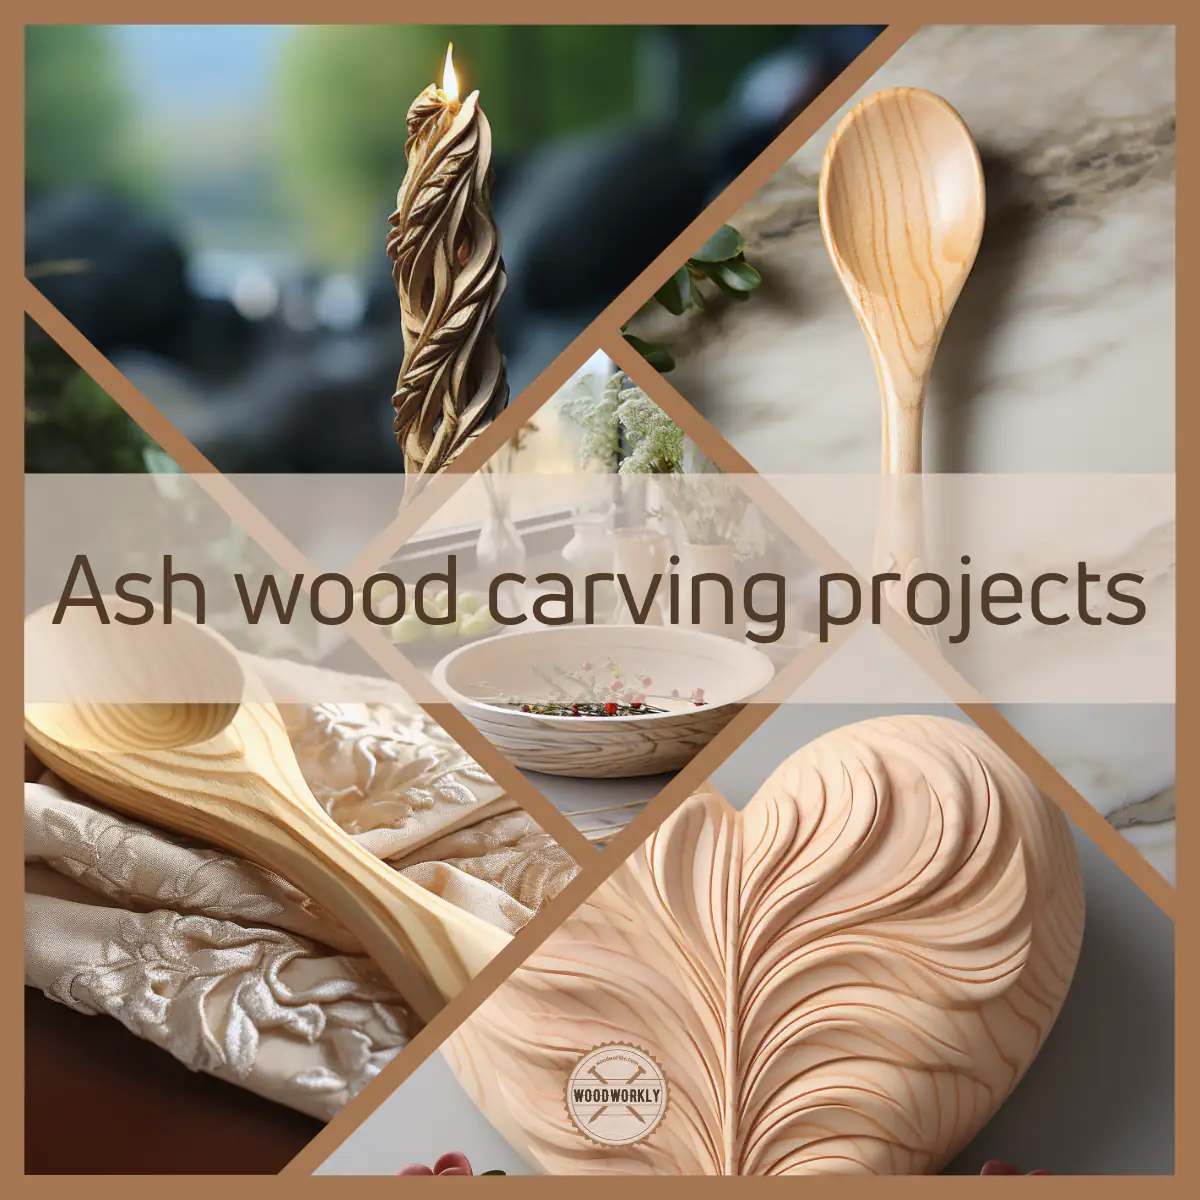 Ash wood carving projects